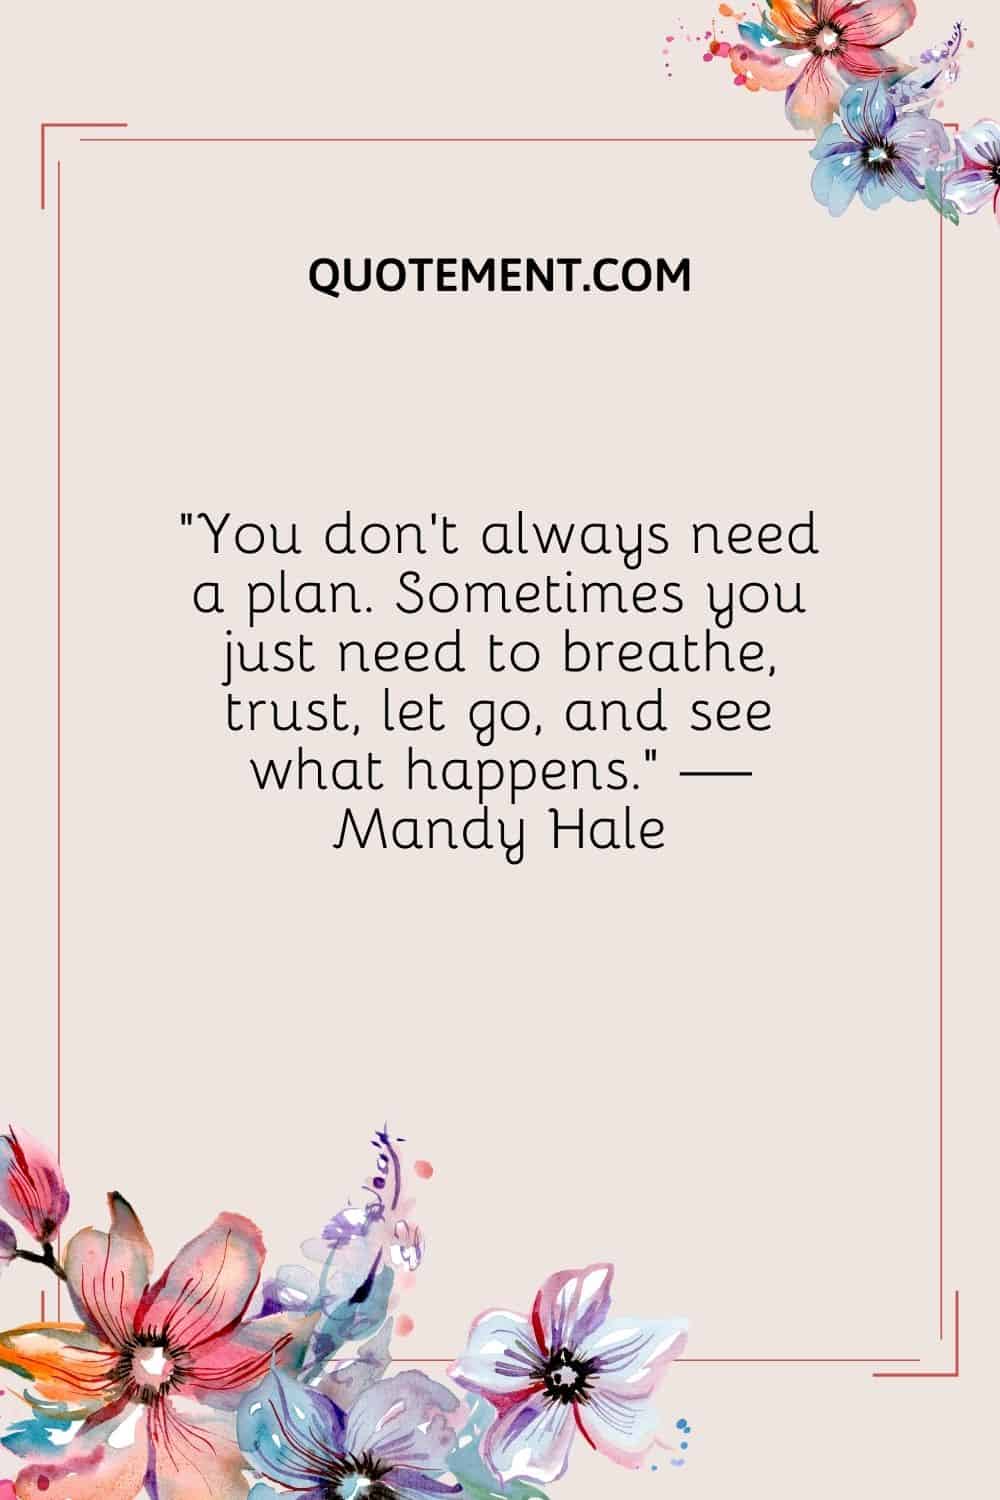 You don't always need a plan. Sometimes you just need to breathe, trust, let go, and see what happens. — Mandy Hale